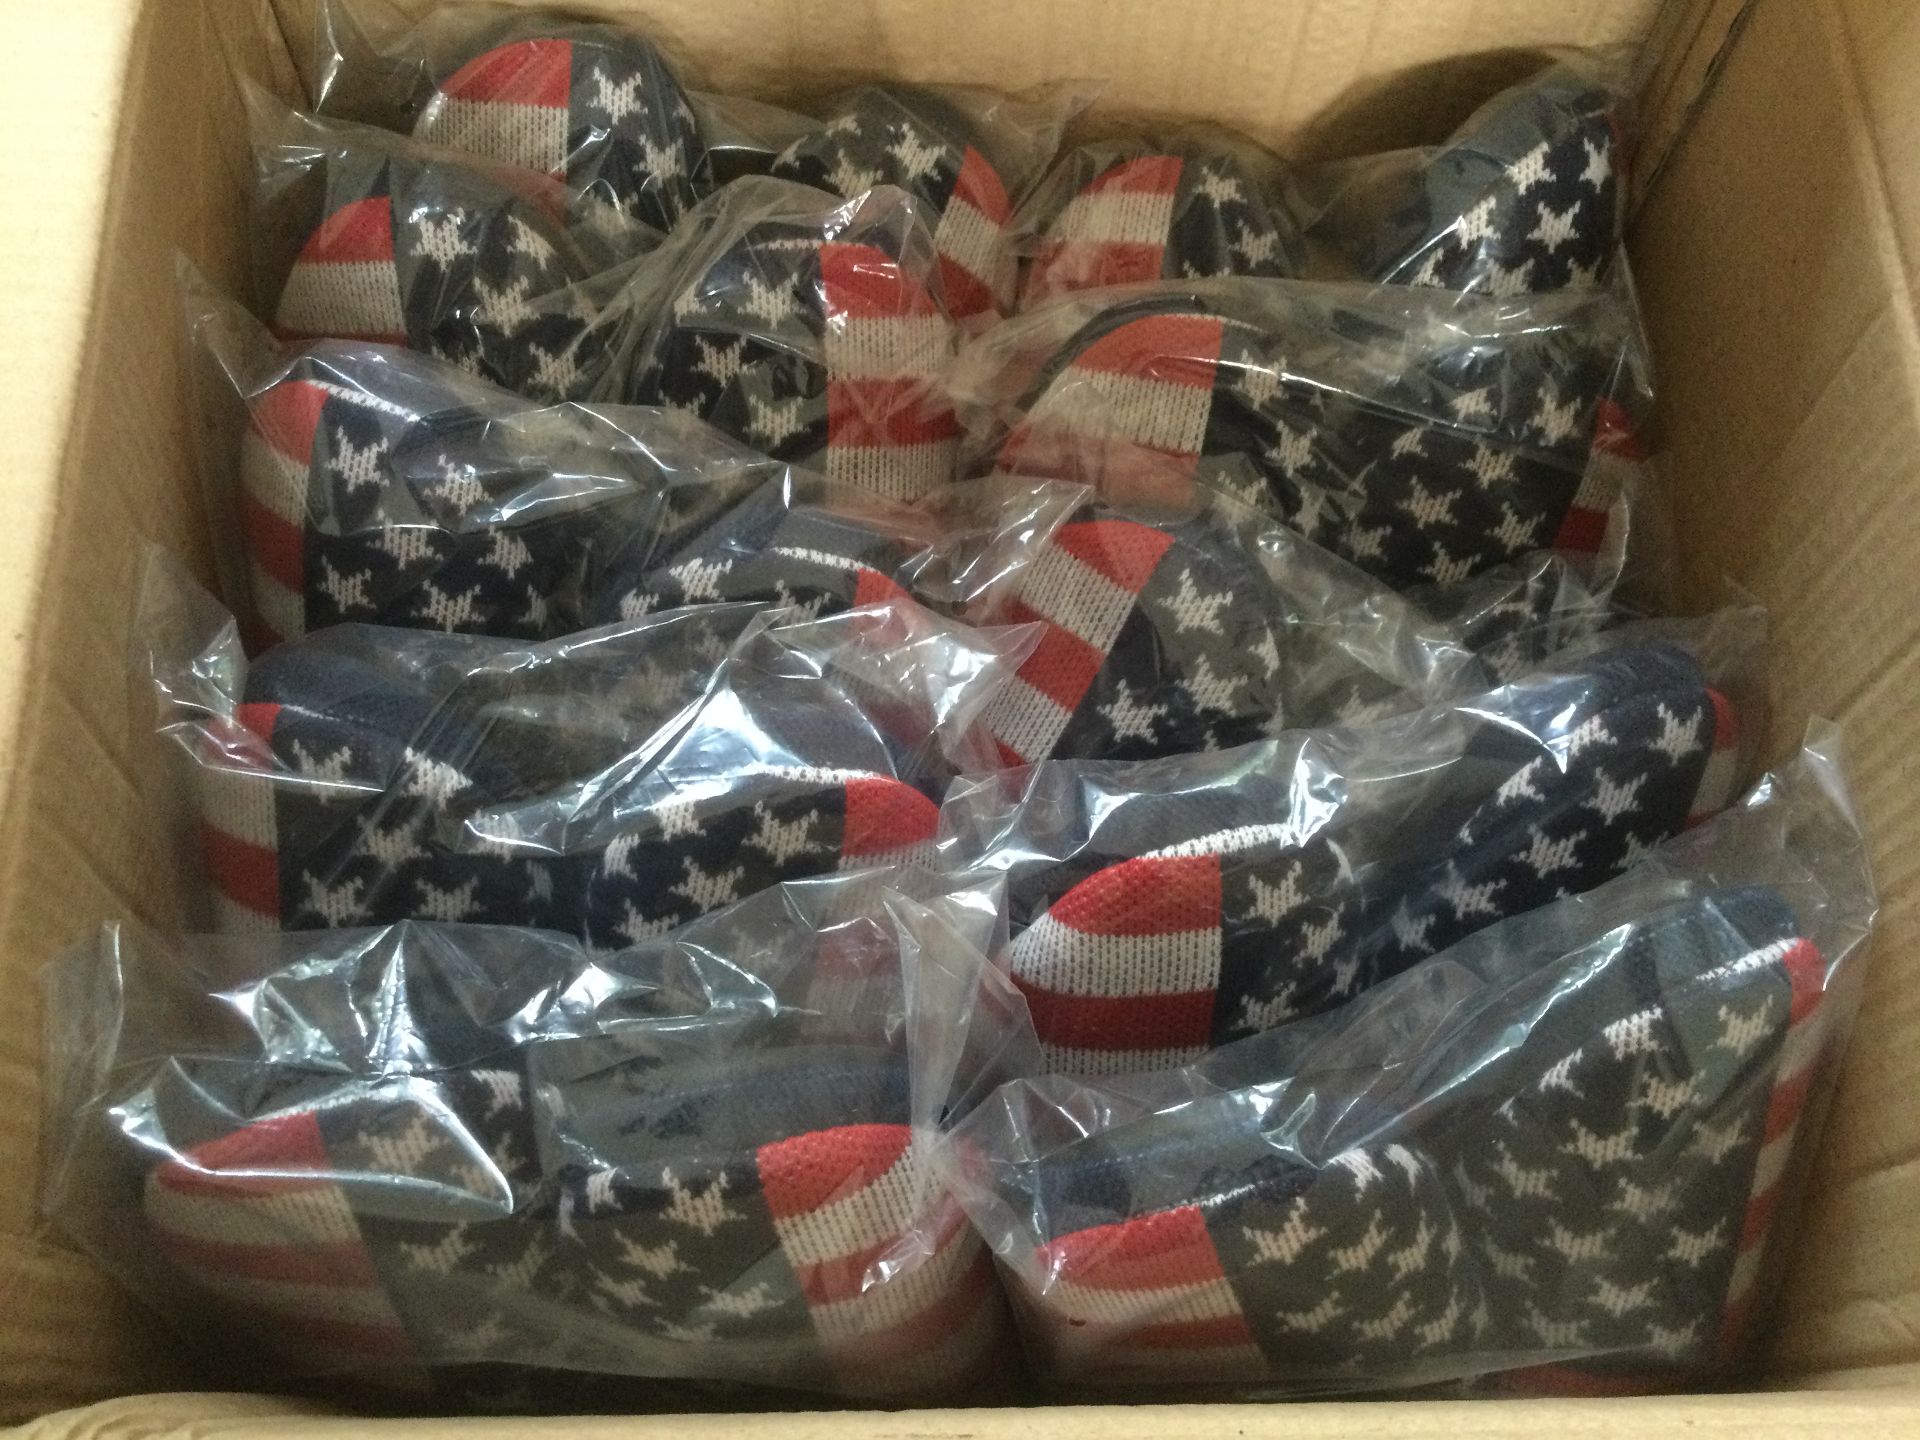 Job Lot 10 x Pairs Men's Dunlop, “USA Stars and Stripes” Memory Foam, Mule Slippers, Size S (6/7) - Image 5 of 6